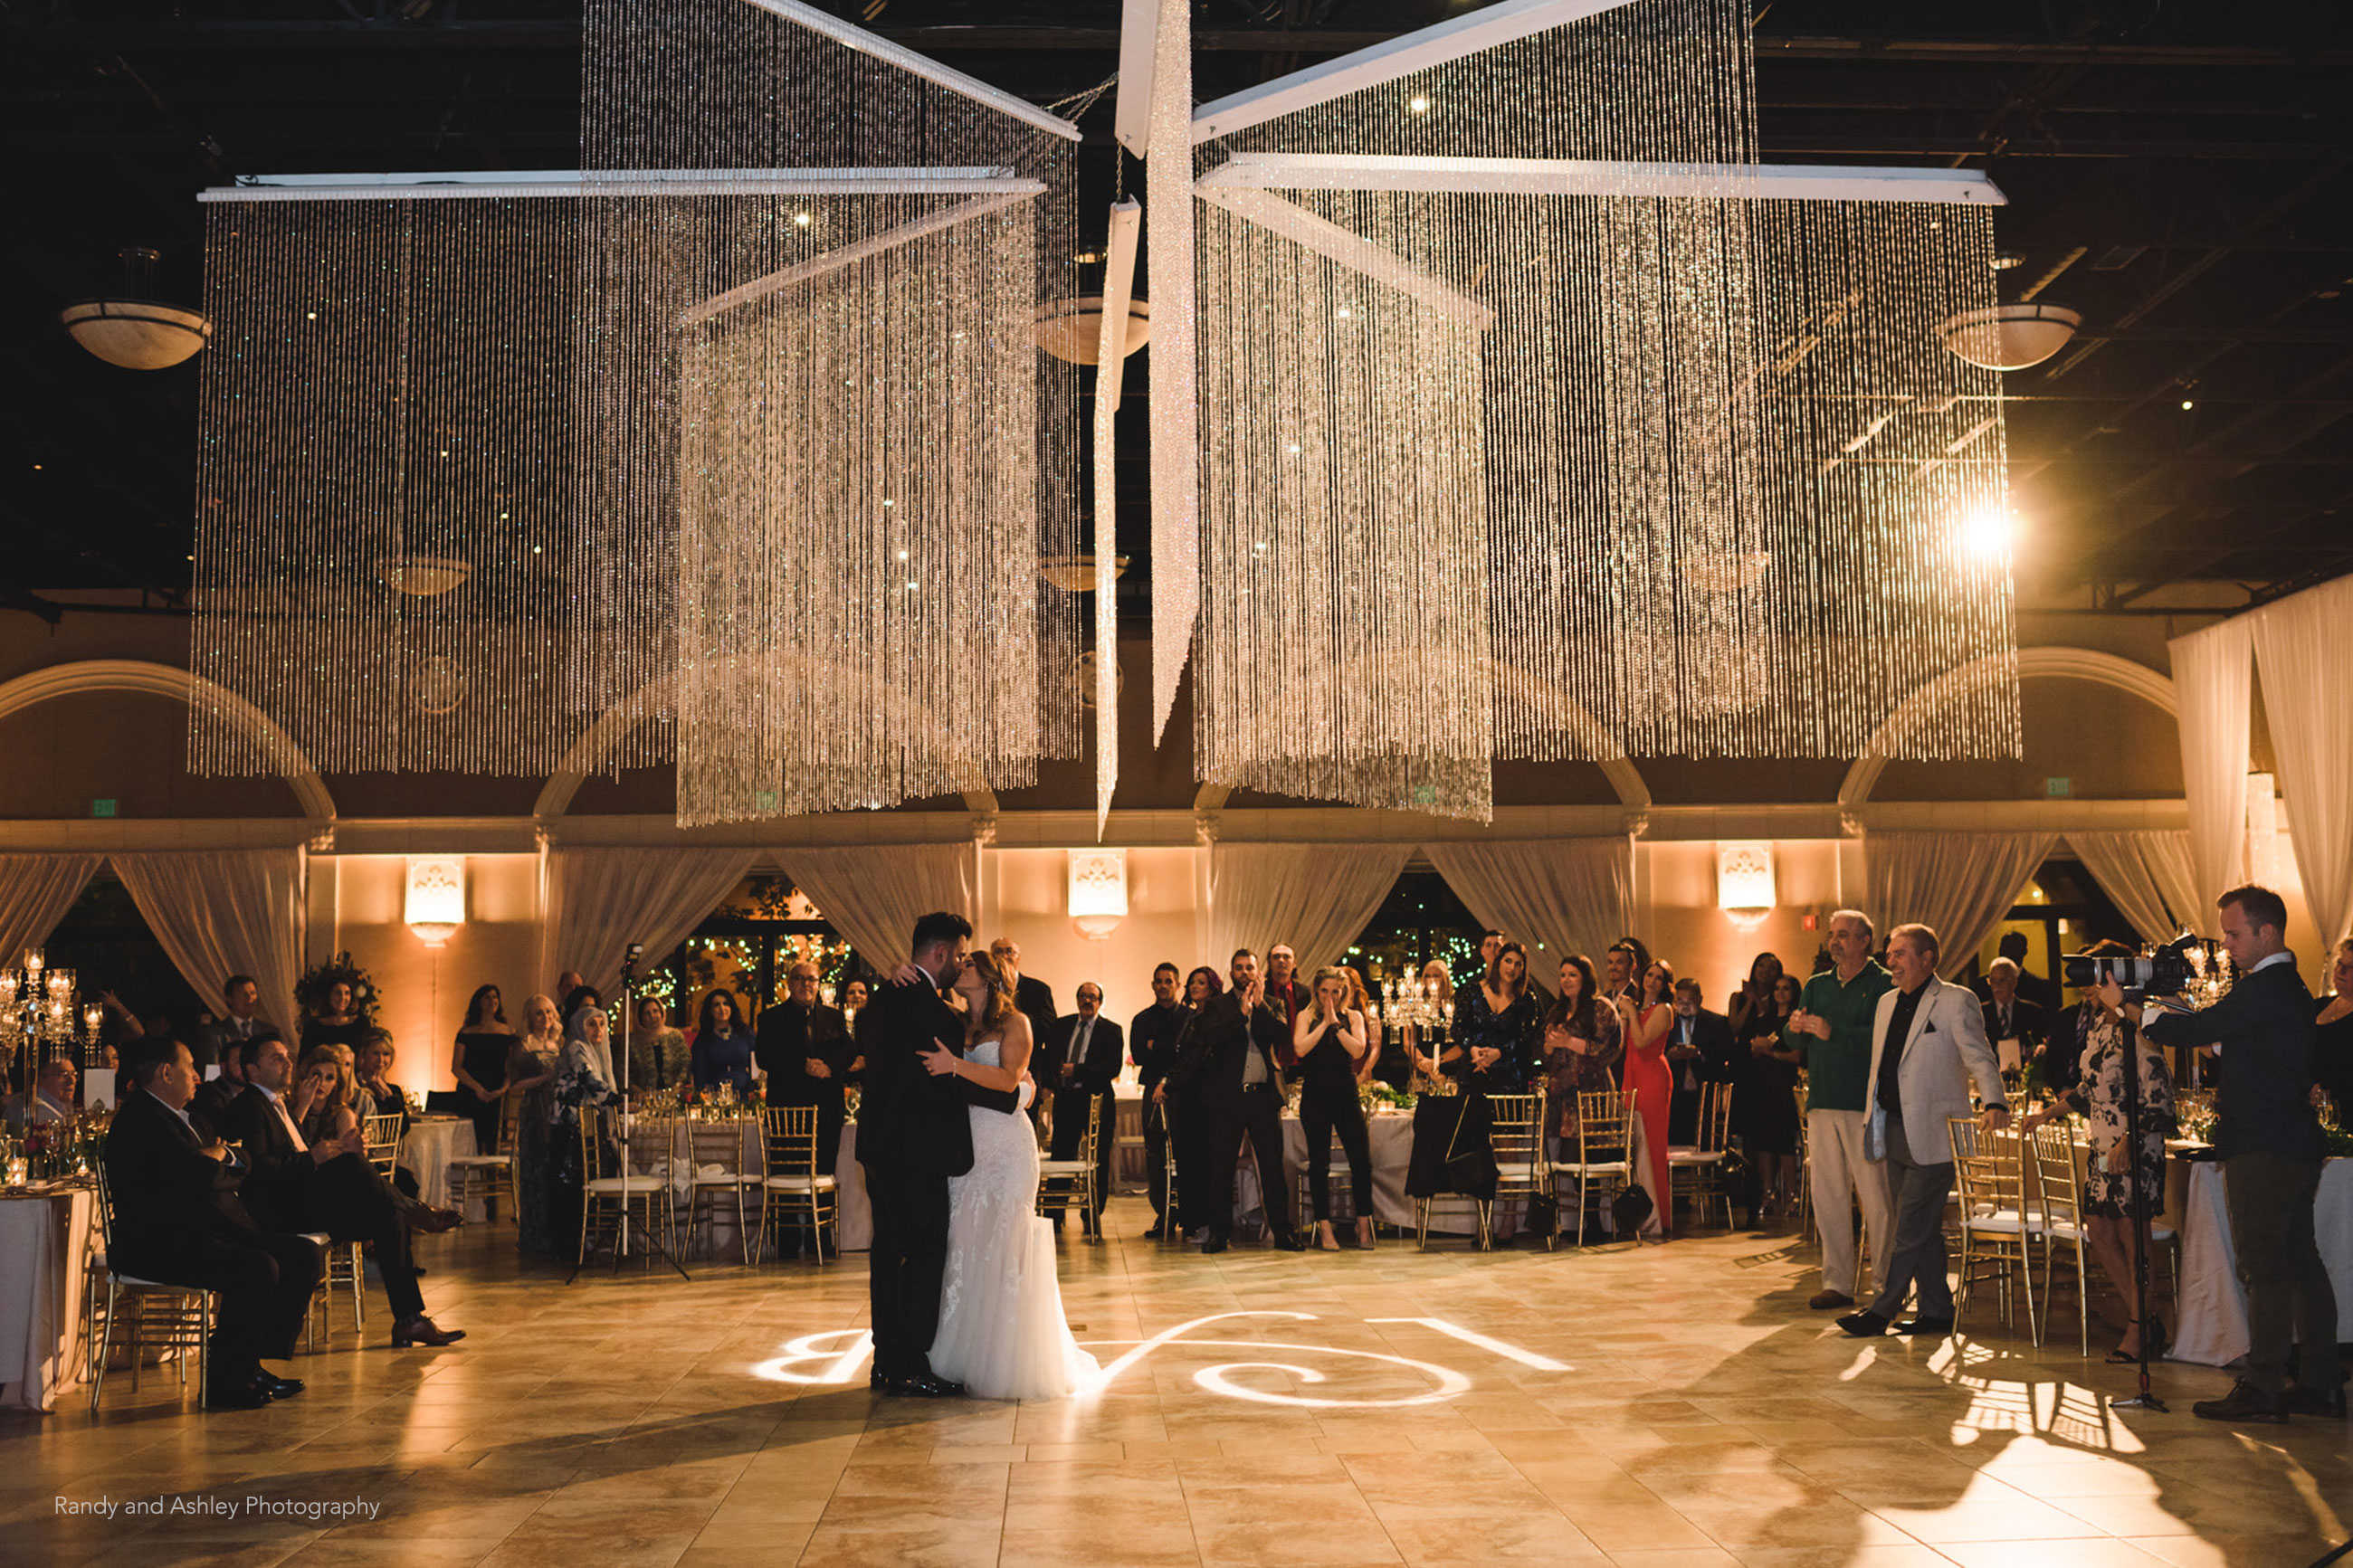 Beautiful first dance with overhead star chandelier during wedding reception at Casa Real at Ruby Hill Winery (www.casarealevents.com).  Photo by: Randy and Ashley Photography; Lighting: Fantasy Sound Event Services